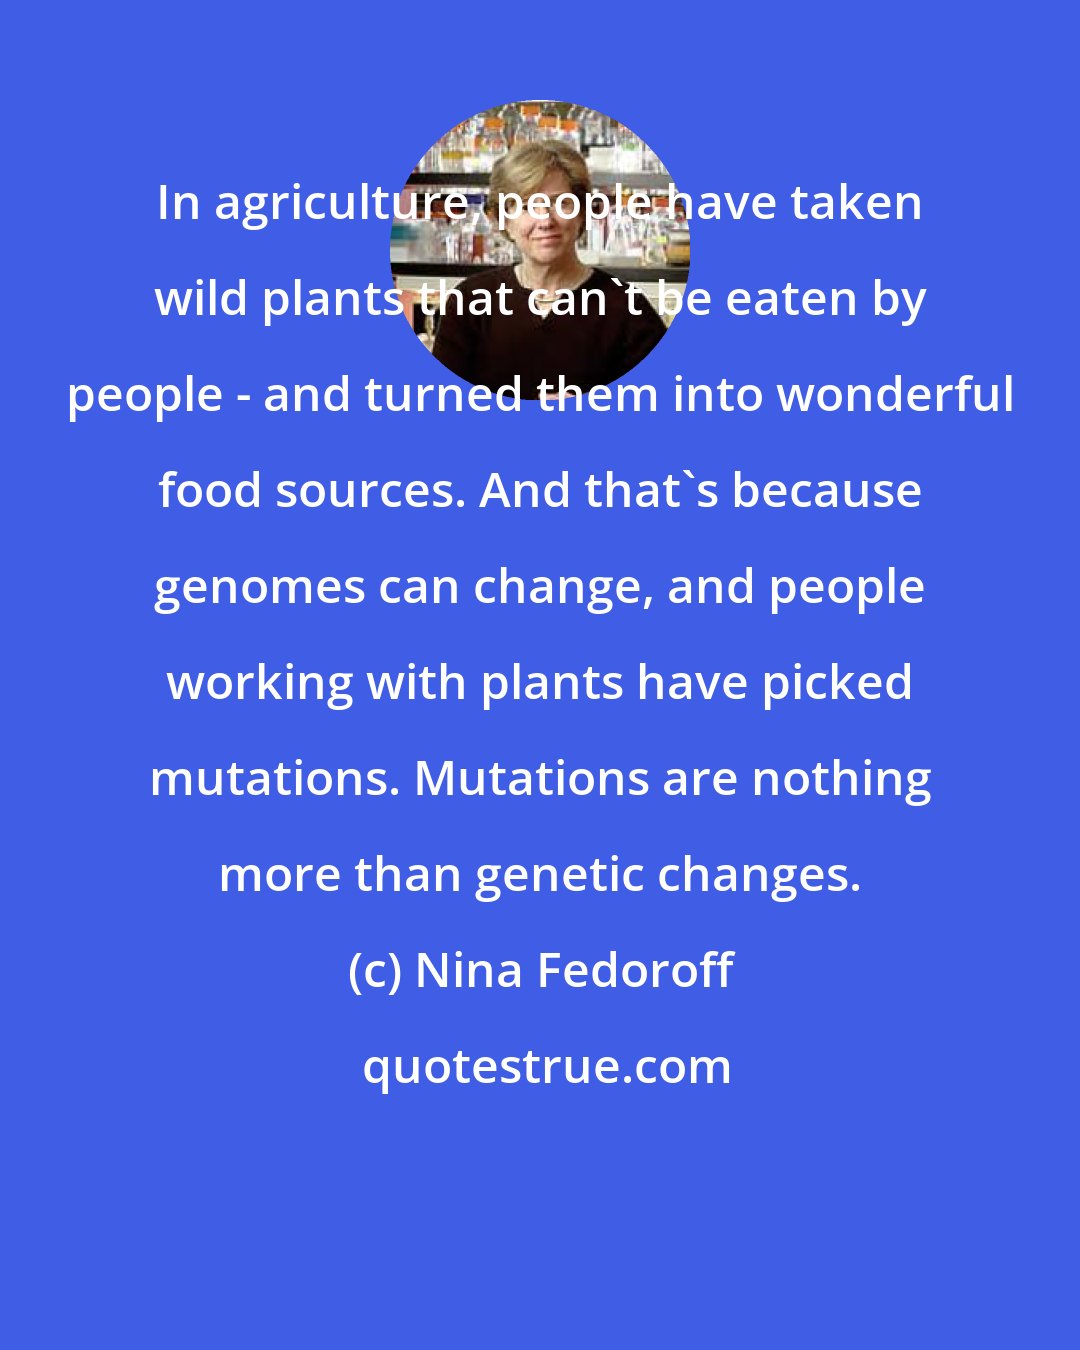 Nina Fedoroff: In agriculture, people have taken wild plants that can't be eaten by people - and turned them into wonderful food sources. And that's because genomes can change, and people working with plants have picked mutations. Mutations are nothing more than genetic changes.